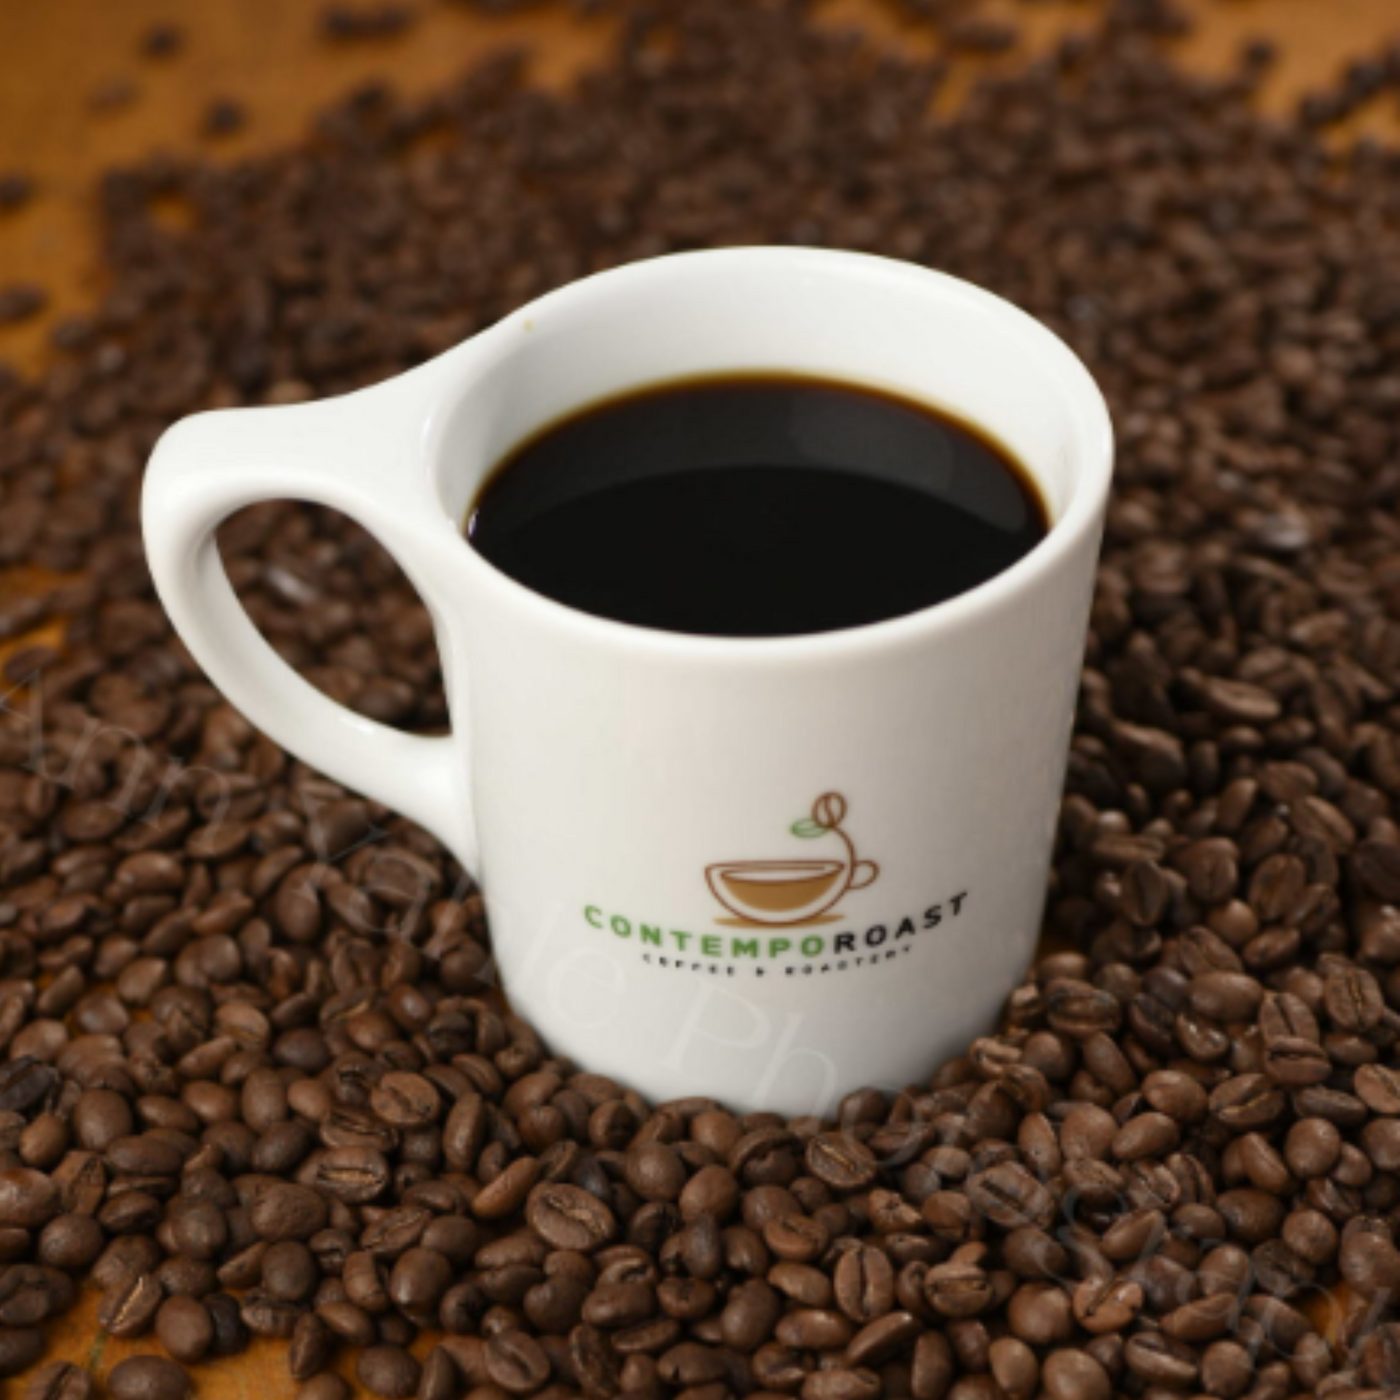 white porcelain mug with ContempoRoast Coffee & Roastery logo on a background of roasted coffee beans